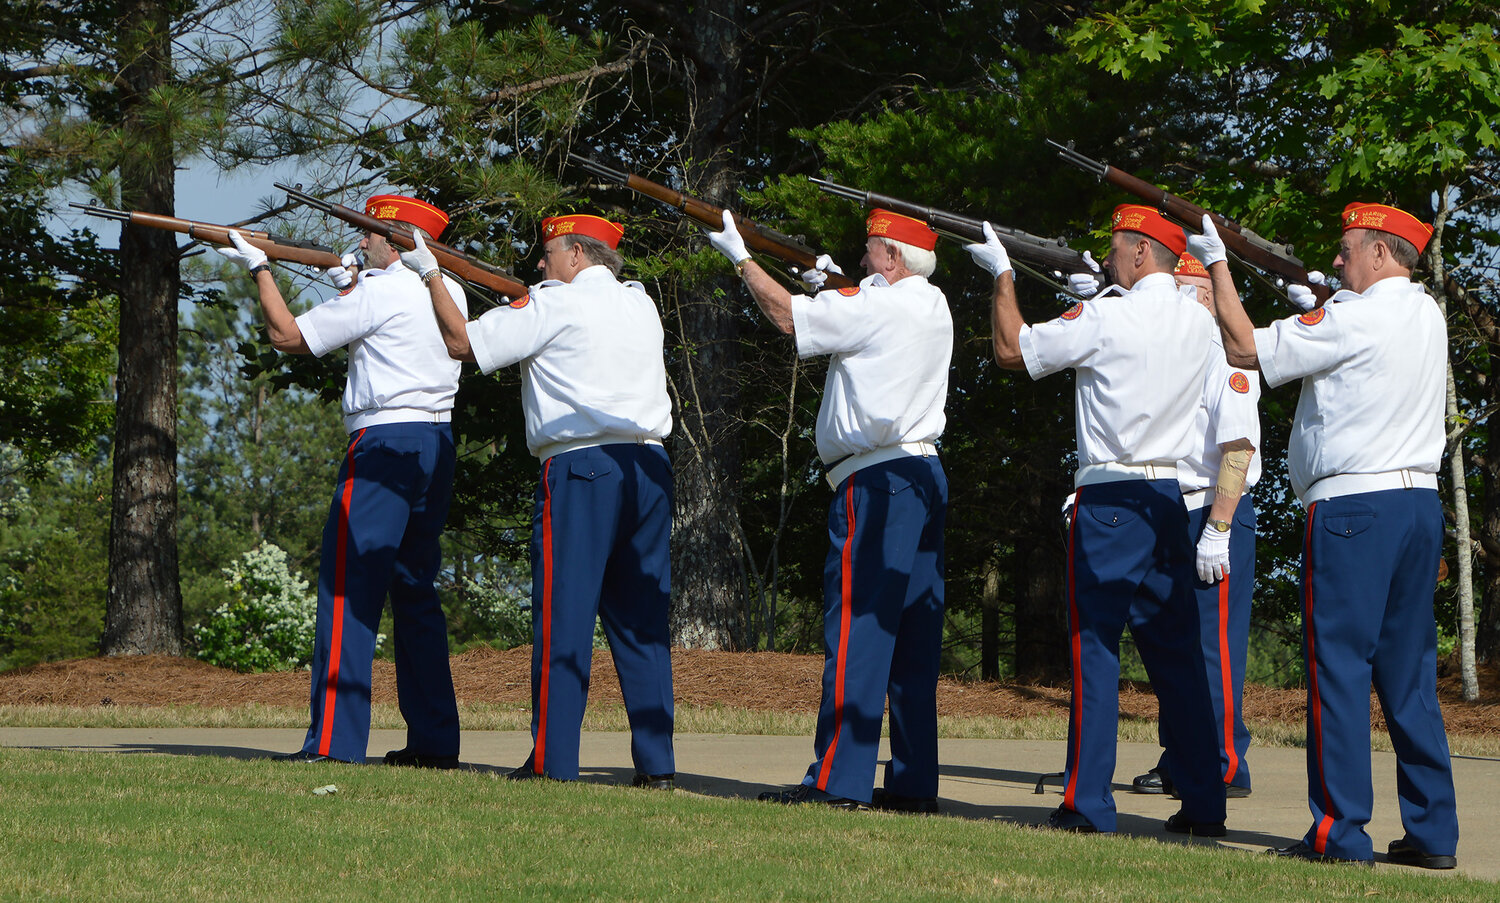 Members of Marine Corps League detachment 1311 from Woodstock, Ga., fire a salute during a ceremony at the Georgia National Cemetery in Canton, Ga., Saturday, May 27, 2023. (Index/Henry Durand)